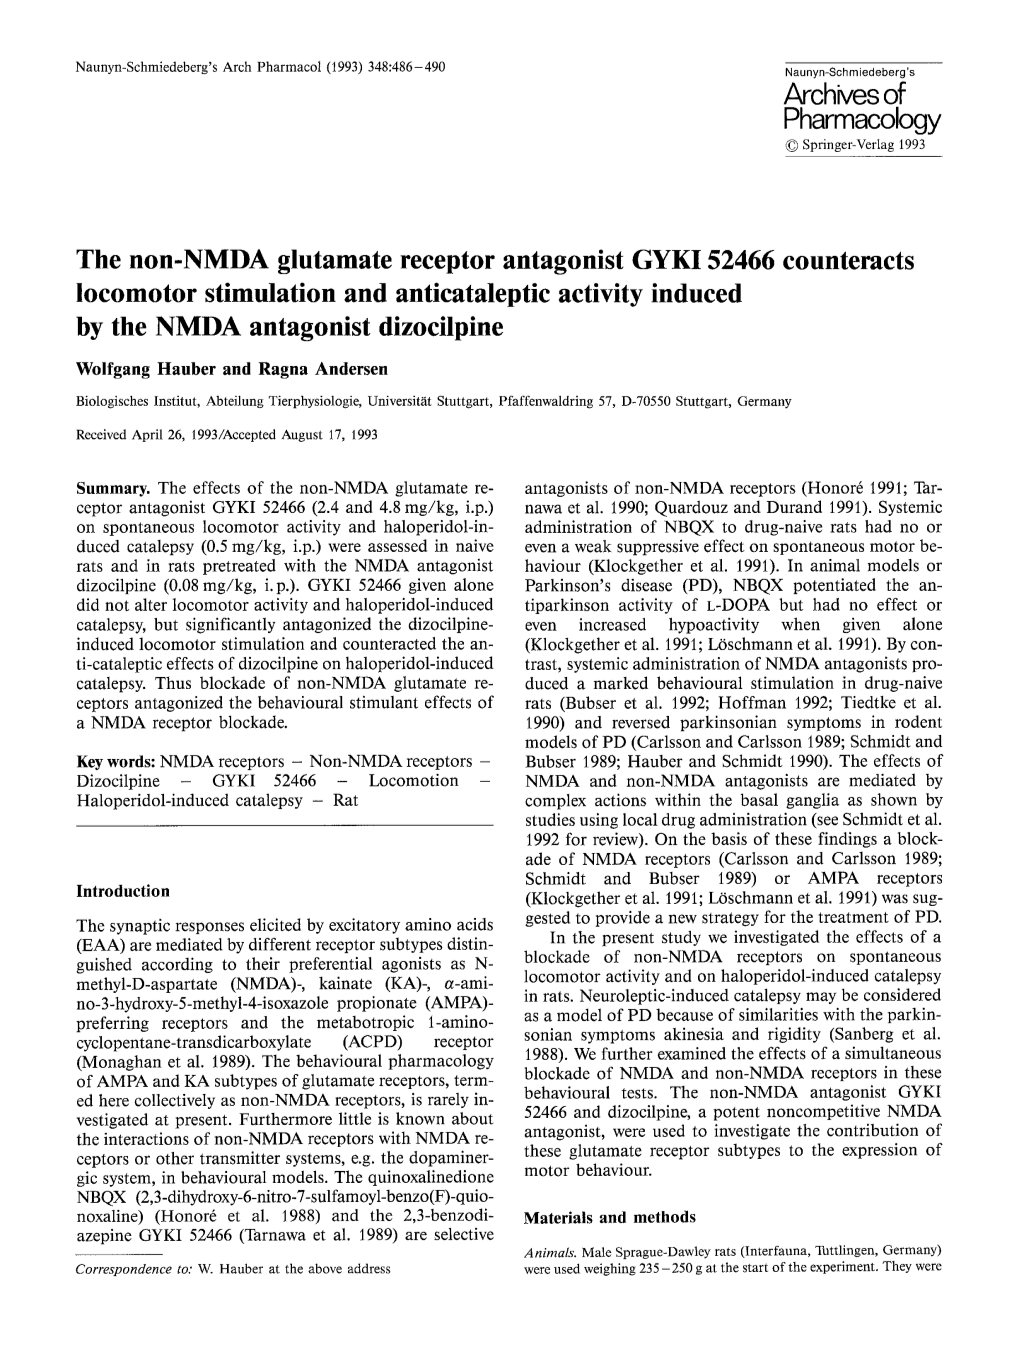 The Non-NMDA Glutamate Receptor Antagonist GYKI 52466 Counteracts Locomotor Stimulation and Anticataleptic Activity Induced by the NMDA Antagonist Dizocilpine